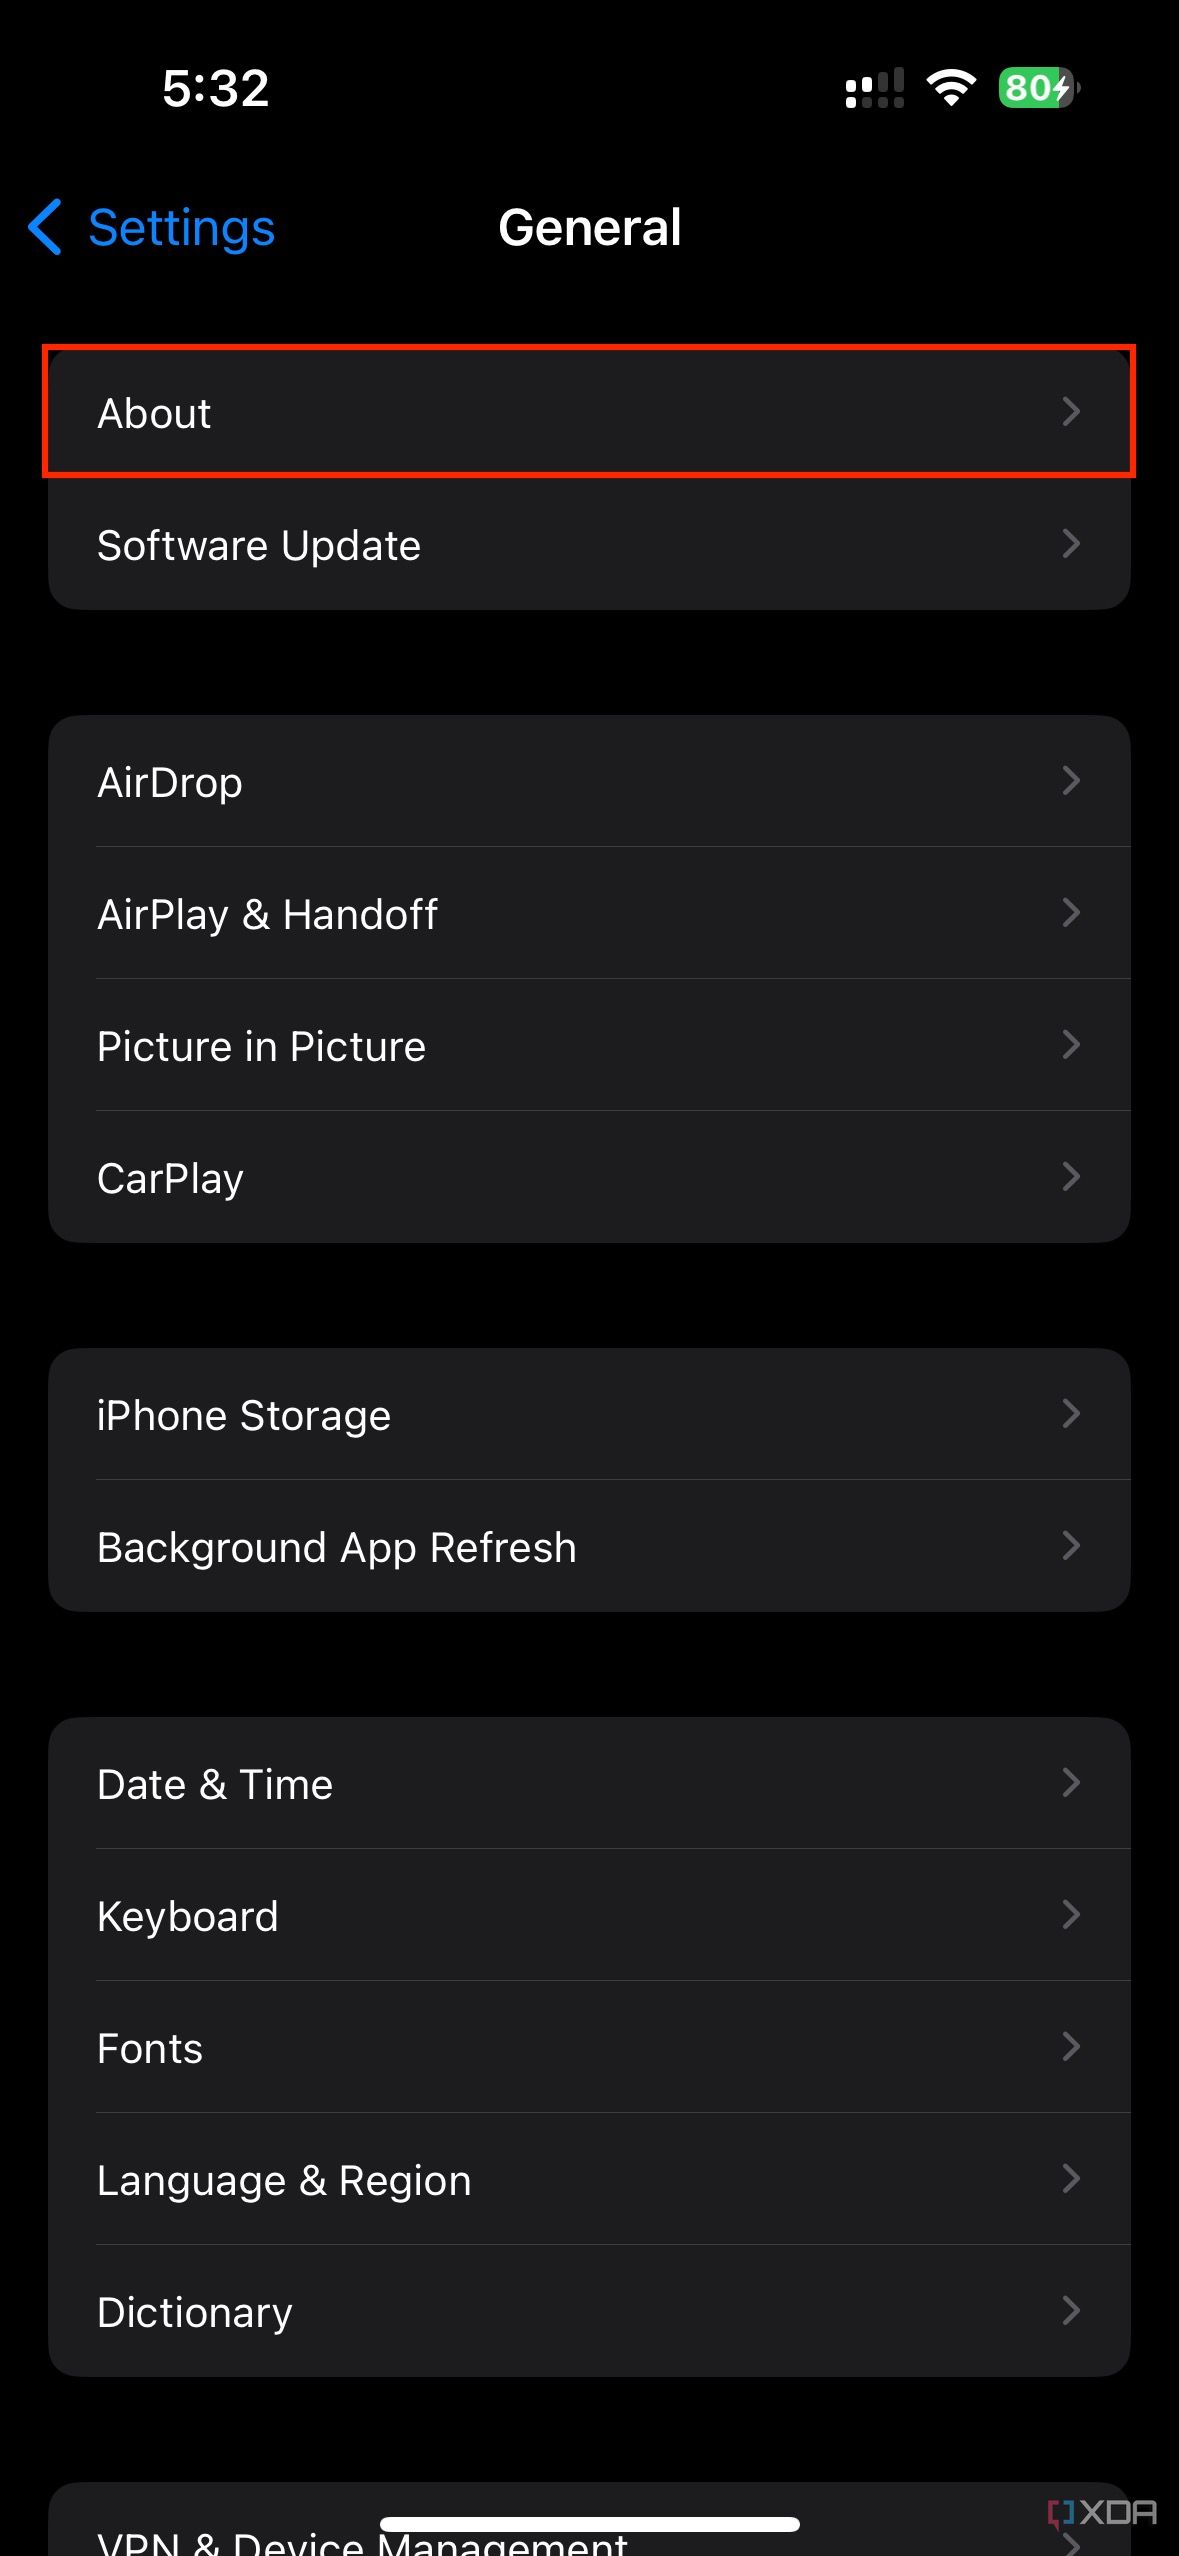 about section in iOS general settings